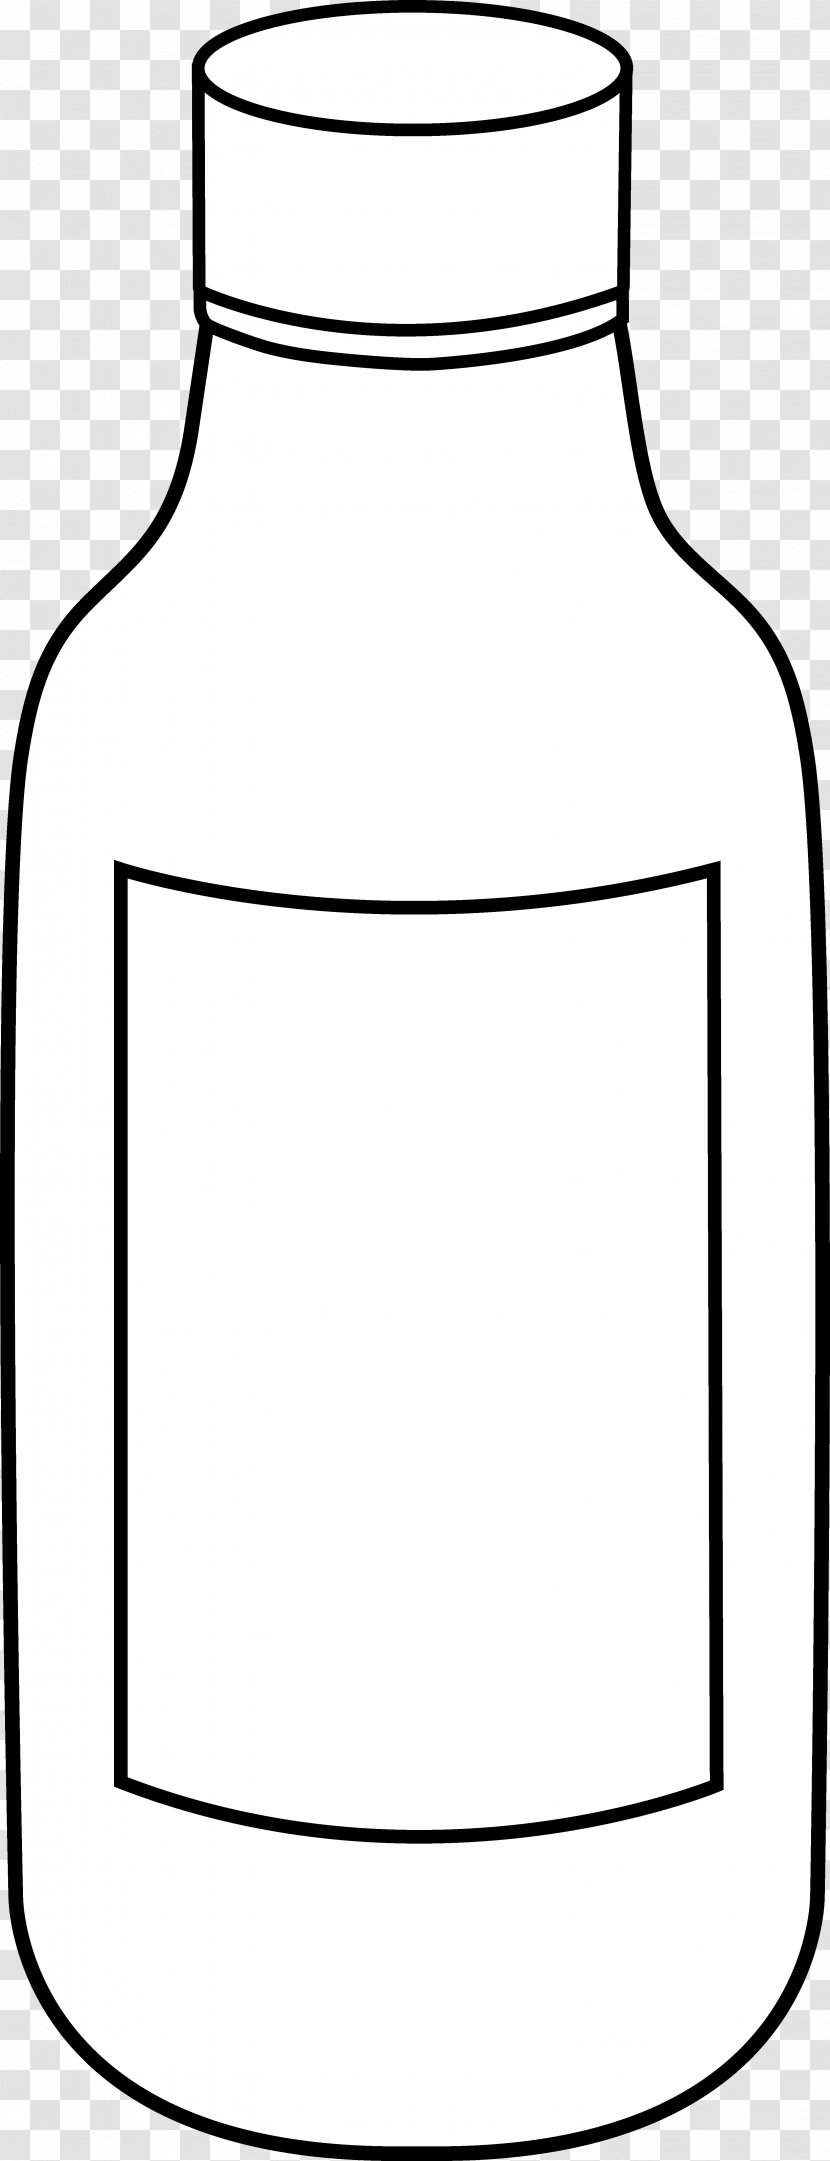 Line Art Bottle Black And White Drawing Clip - Royaltyfree - Science Cliparts Transparent PNG